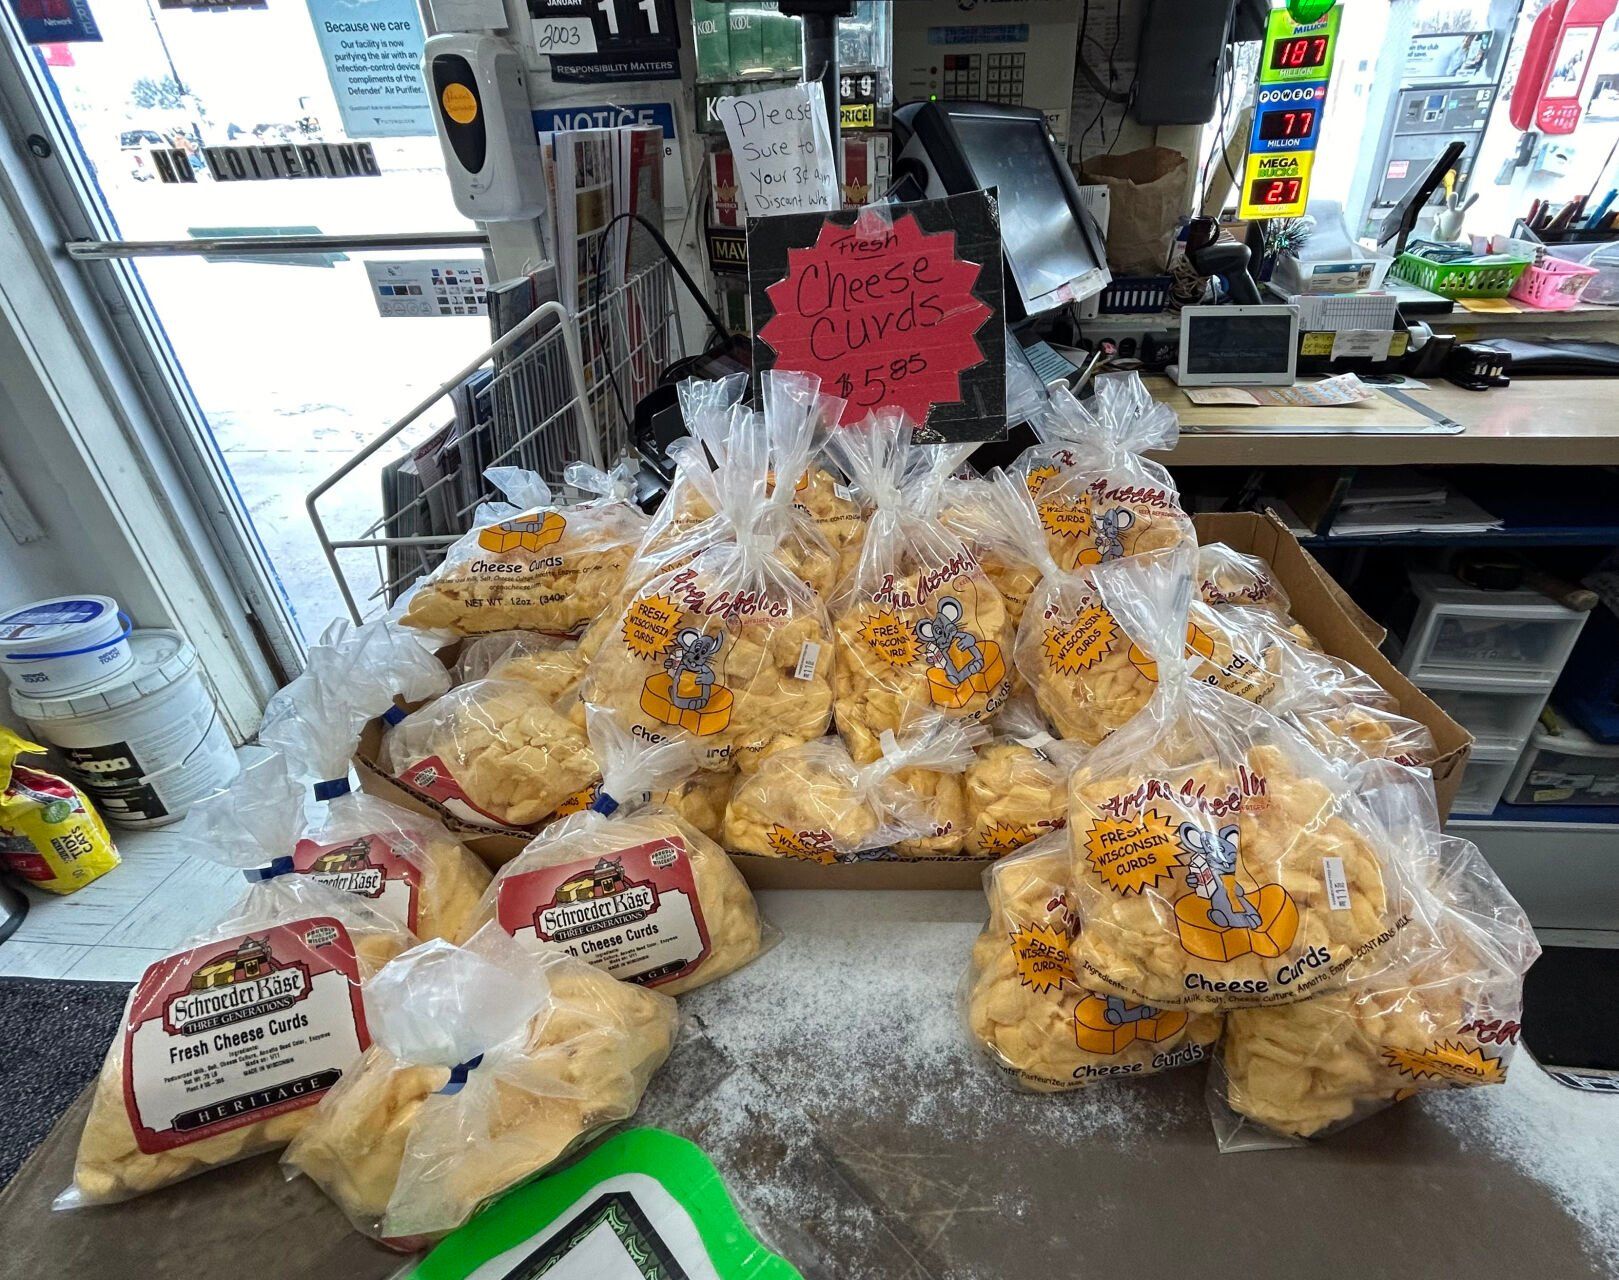 Bags of fresh cheese curds sit on the front counter at Speedy Mart, a convenience store in Fennimore, Wis.    PHOTO CREDIT: Erik Hogstrom
Telegraph Herald